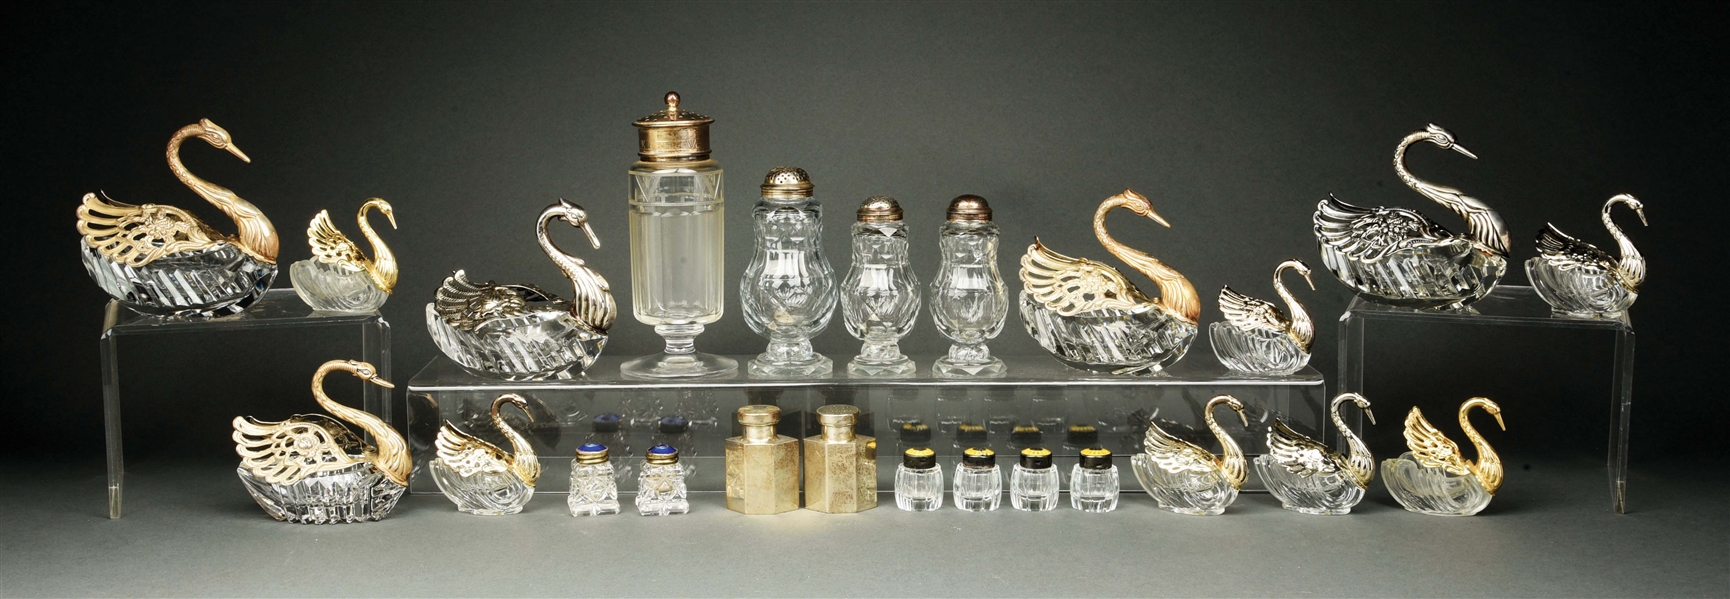 A GROUP OF STERLING AND GLASS SWAN SALT CELLARS.